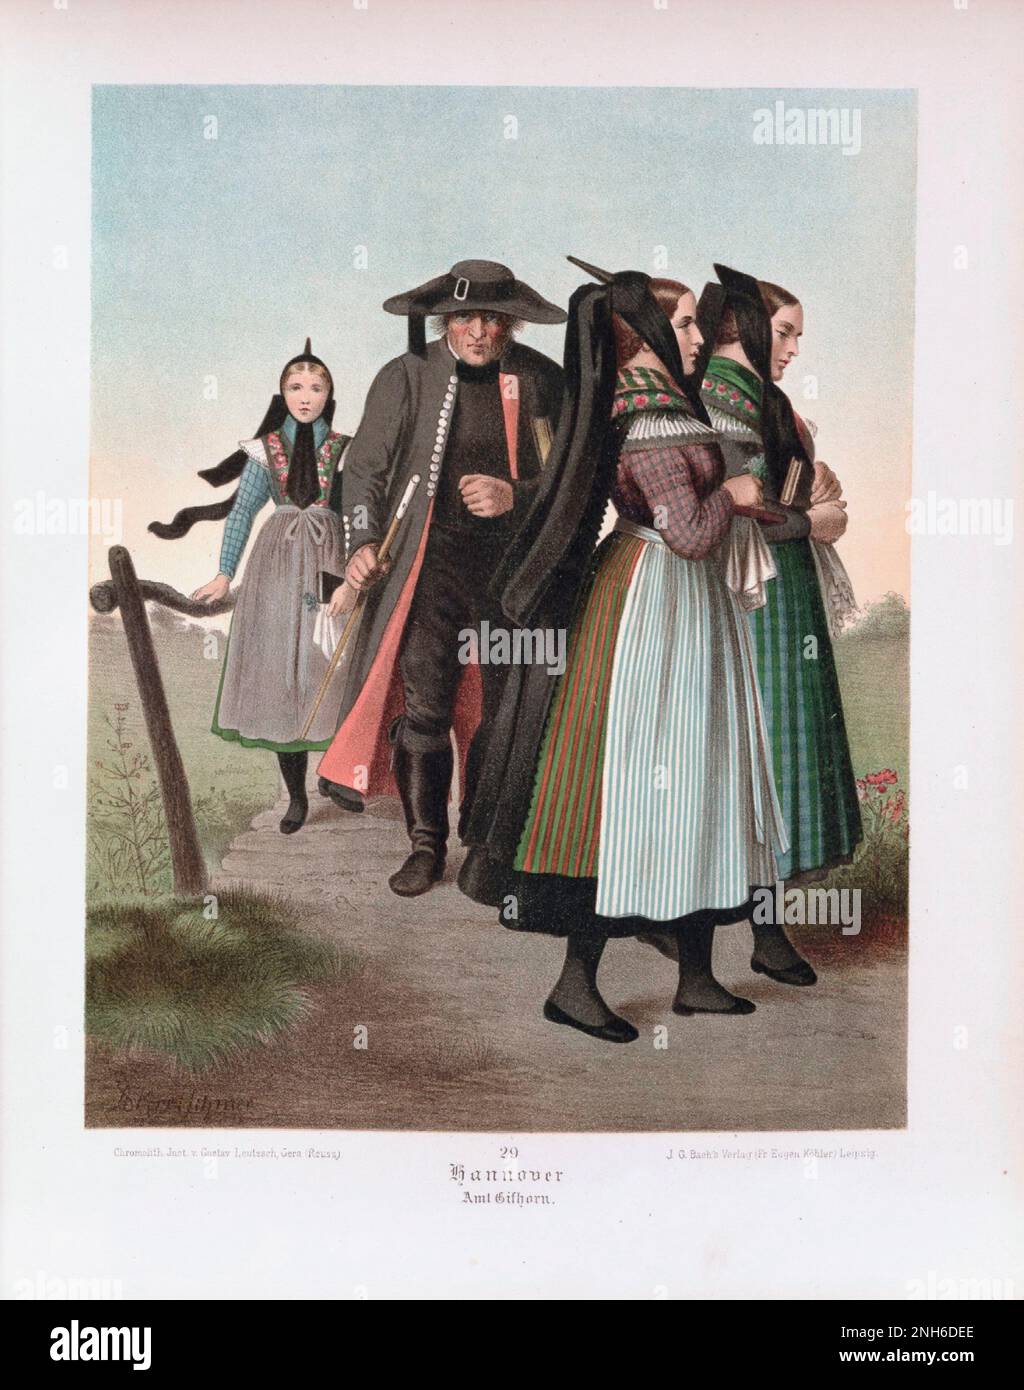 German folk costume. Hanover (German: Hannover). 19th-century lithography. Stock Photo